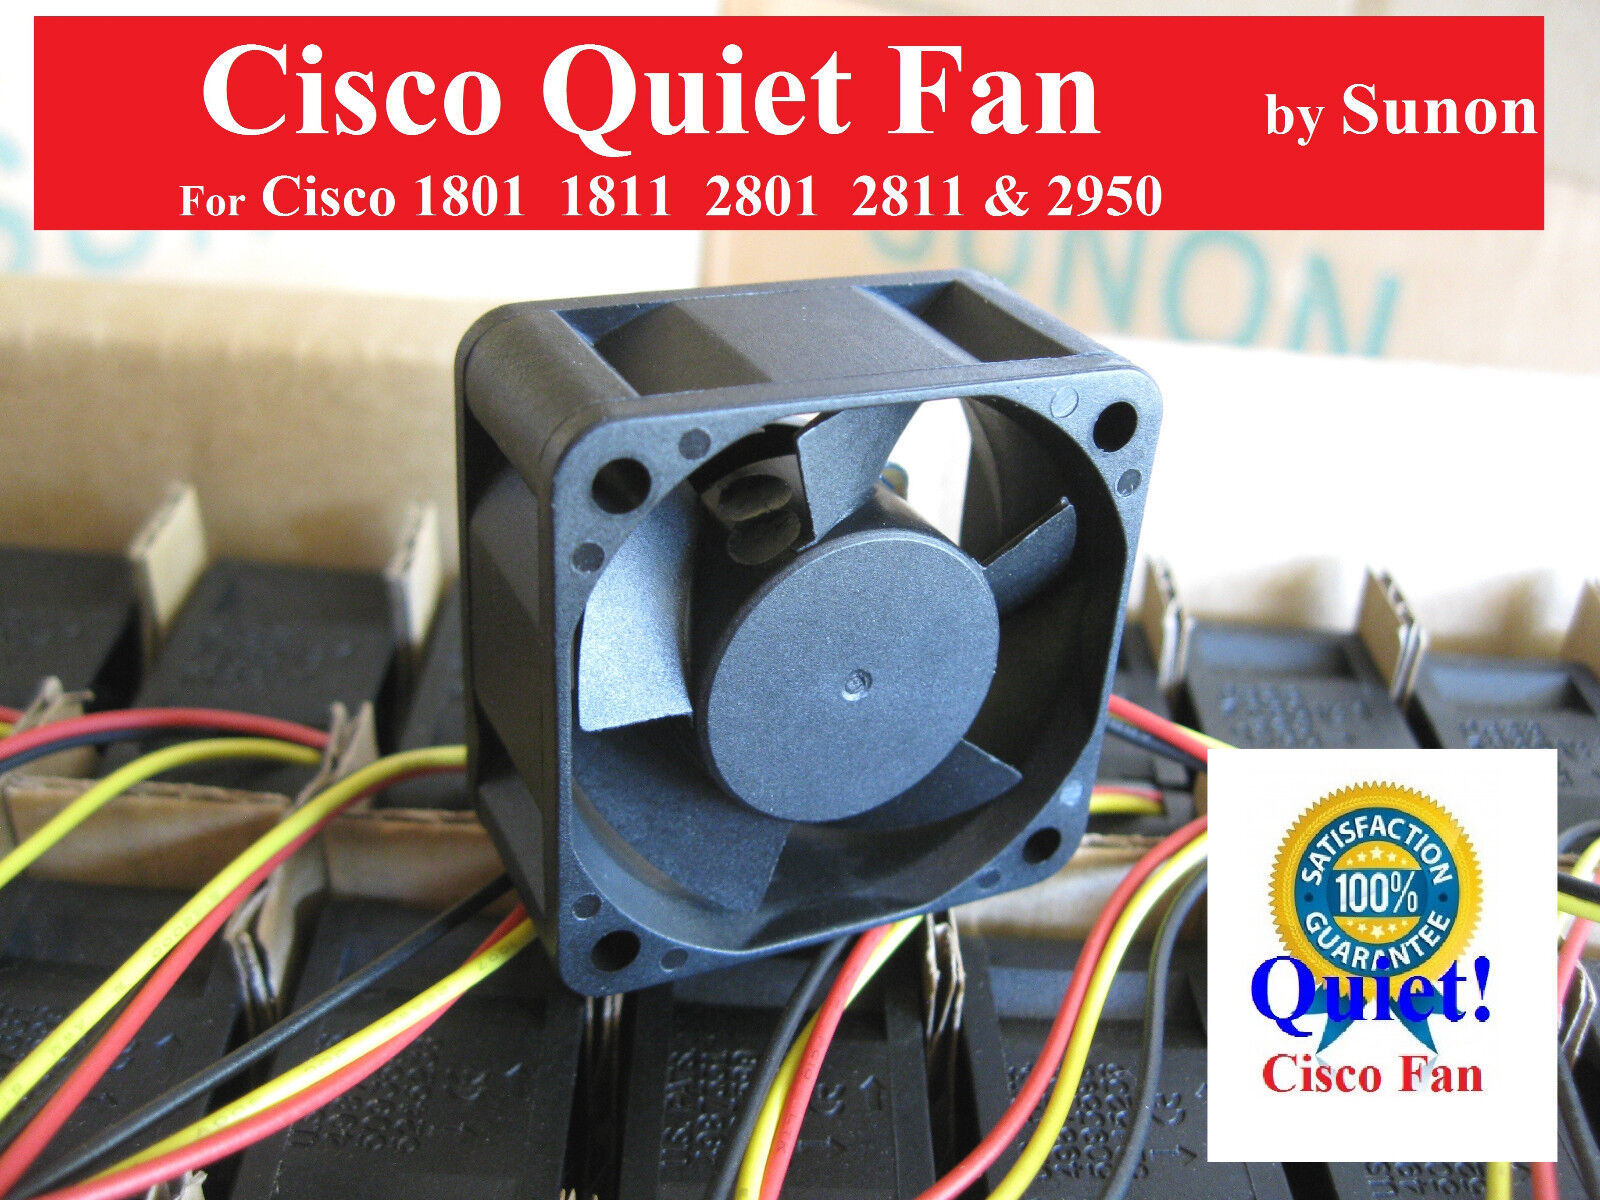 1x very Quiet Cisco Replacement fan for Cisco Routers & Switches 2801 2811 2950